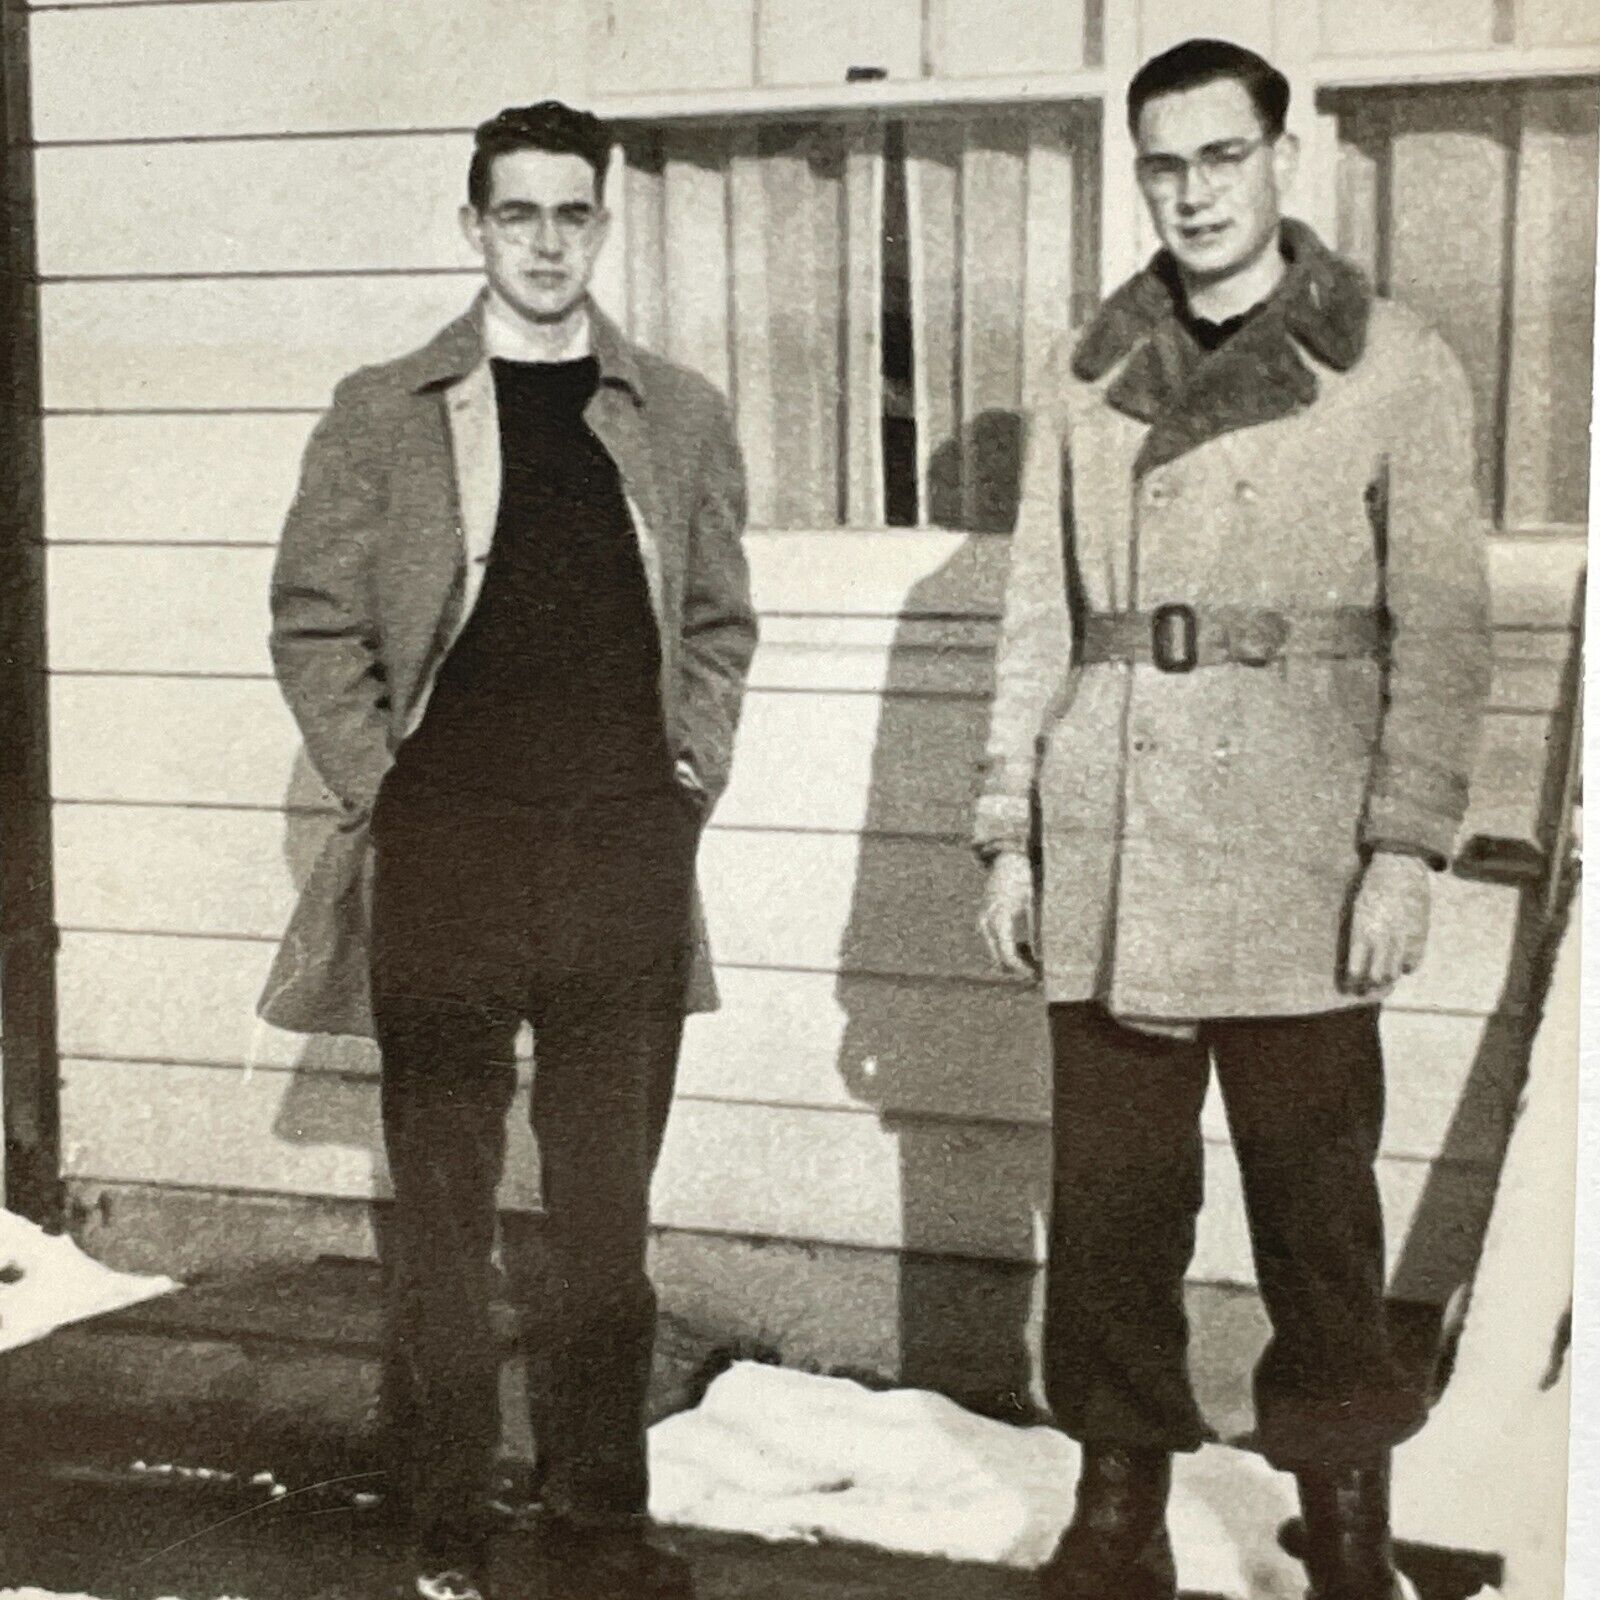 NH Photograph 2 Handsome Men Possibly Brothers Pose With Coats Snowy Day